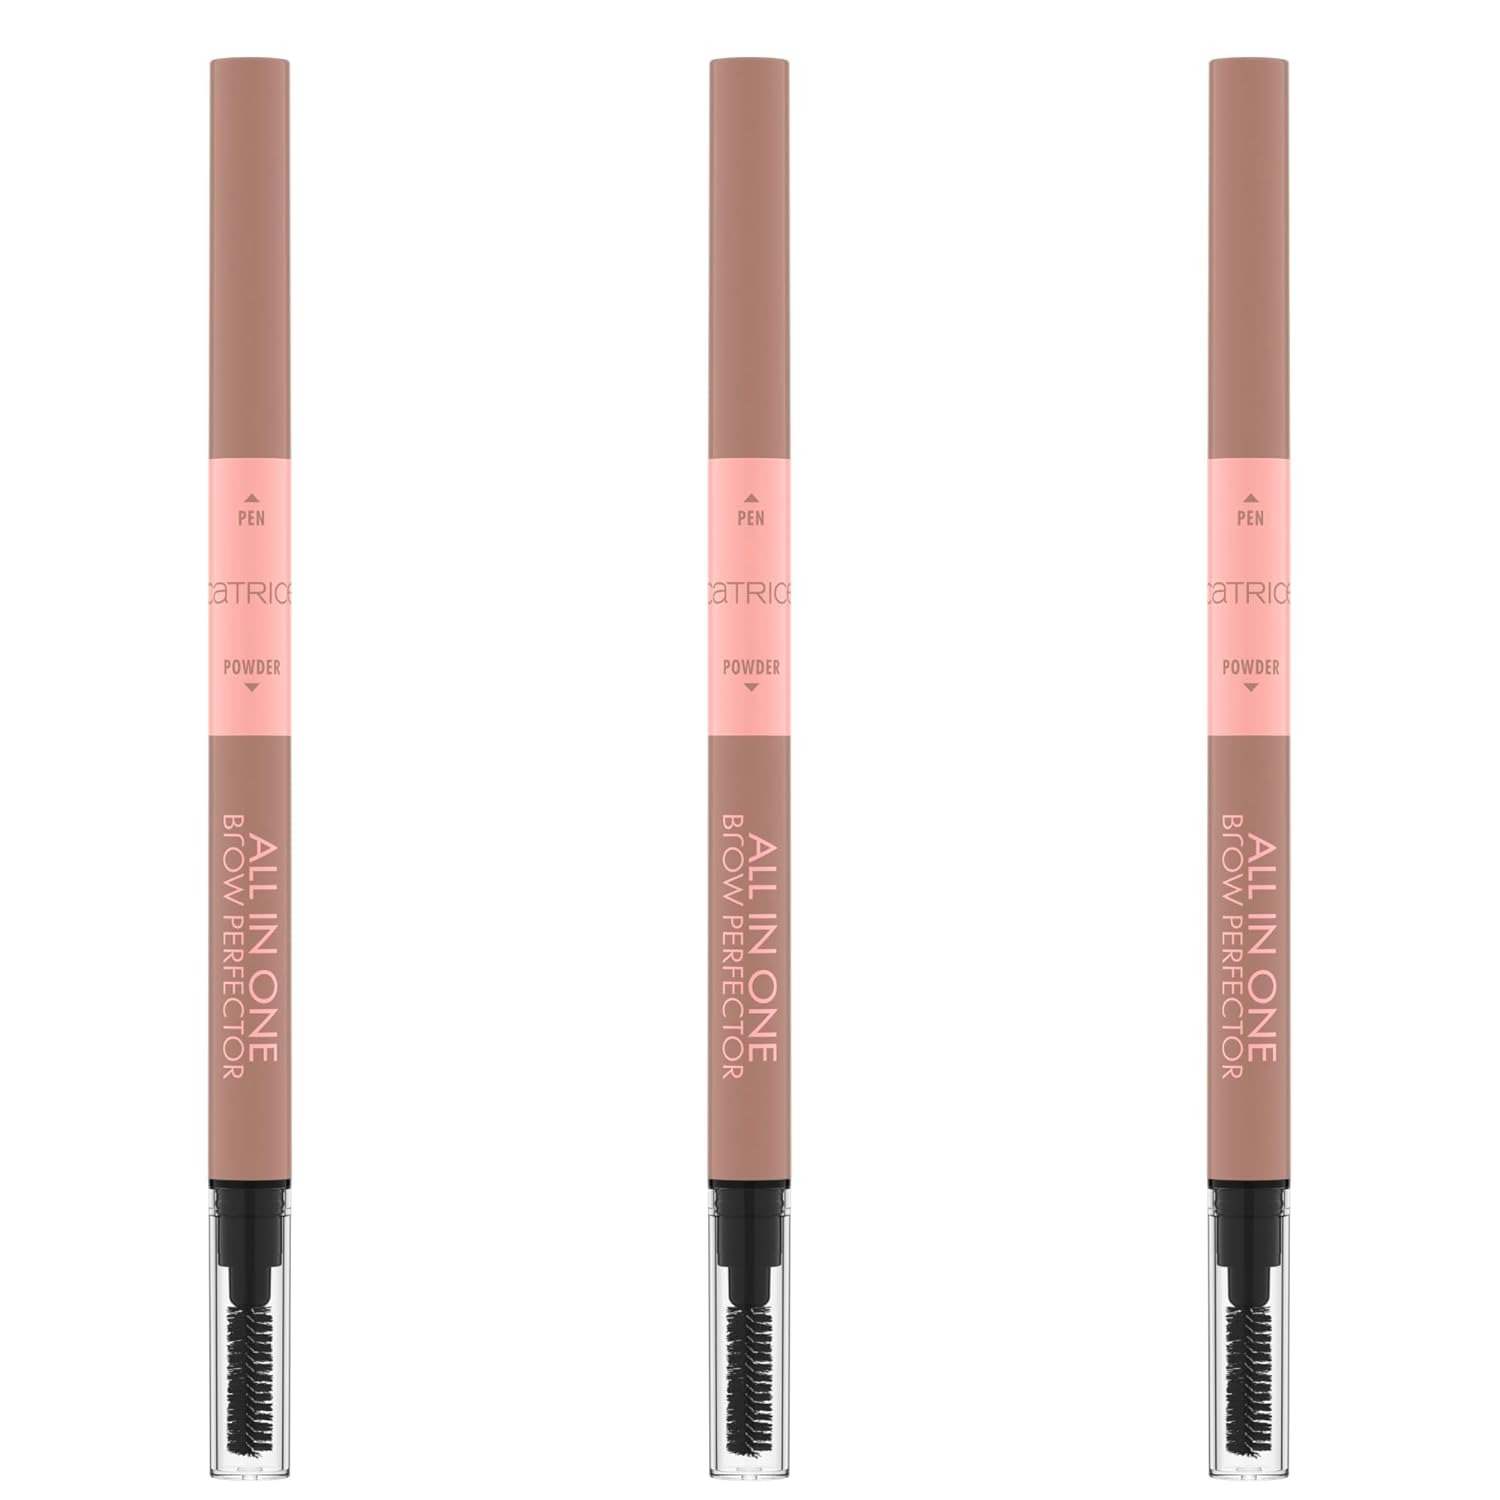 Catrice All In One Brow Perfector Eyebrow Pencil, No. 010, Brown, Long-Lasting, Covering, Defining, Vegan, No Microplastic Particles, Nanoparticles Free, No Perfume, Pack of 3 (3 x 0.4 g)